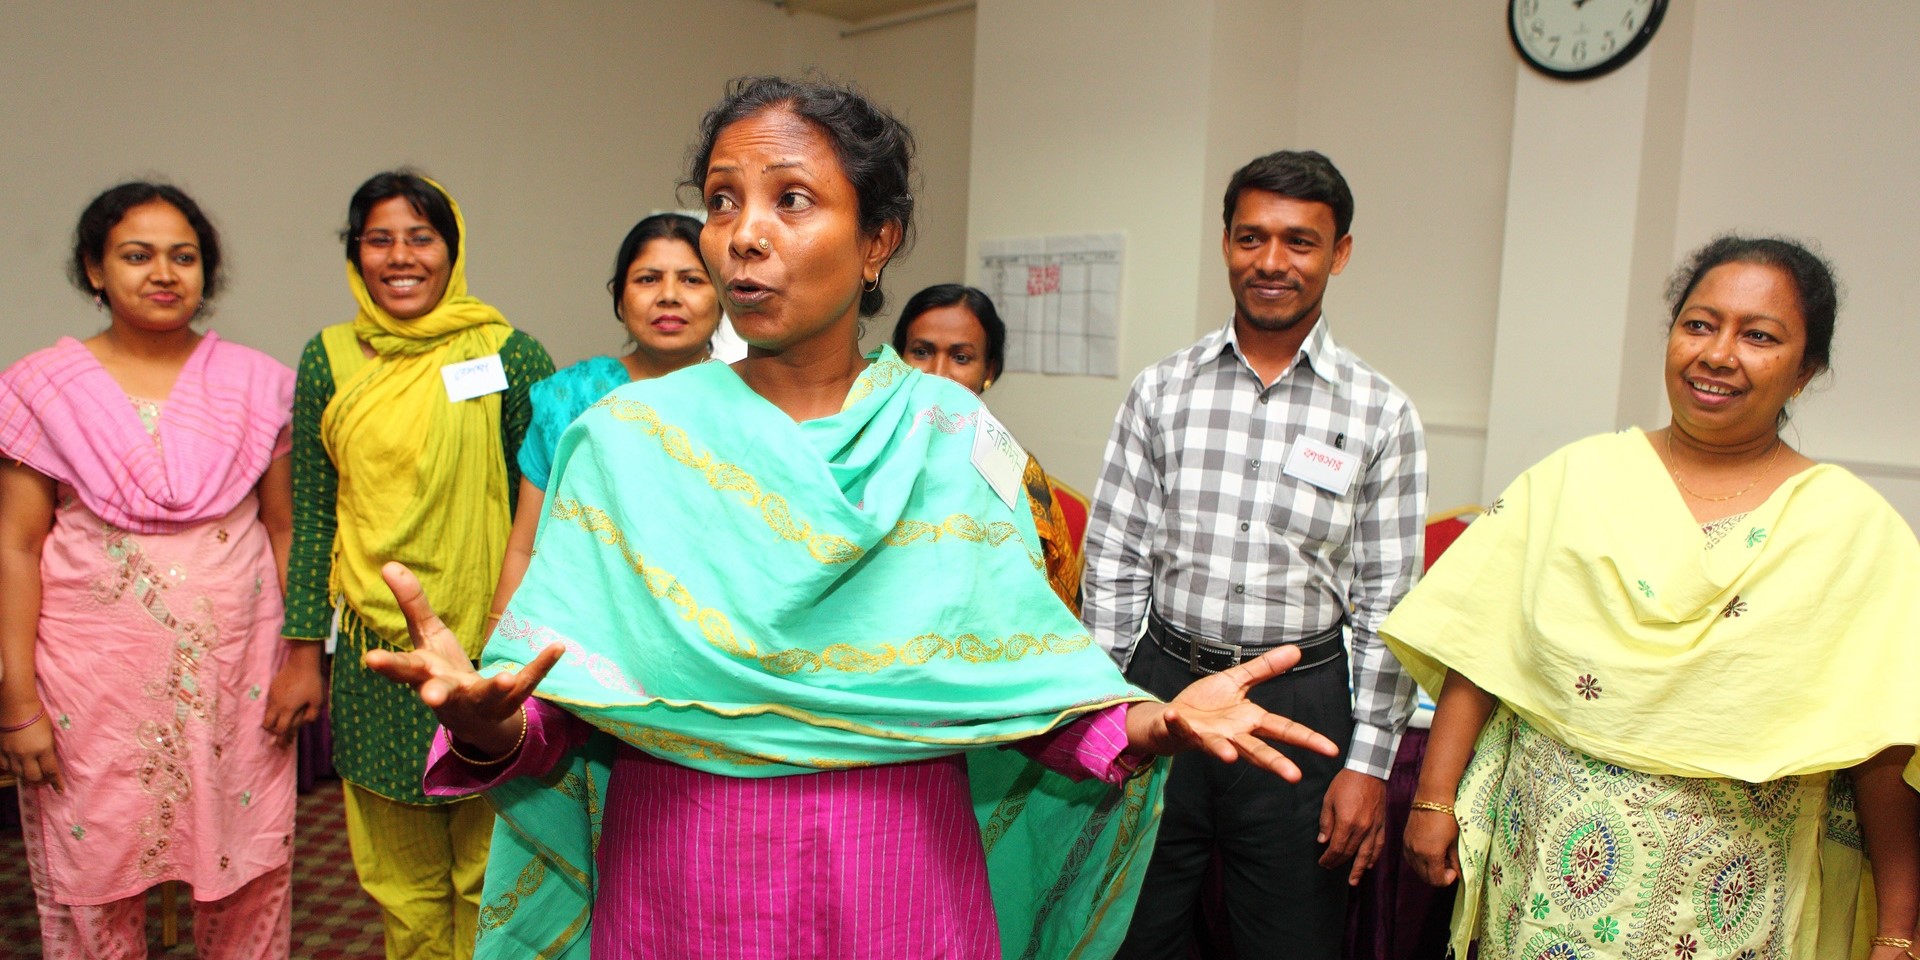 Clinic staff practice facilitating group meetings during a Surjer Hashi Health Group training session in Bangladesh